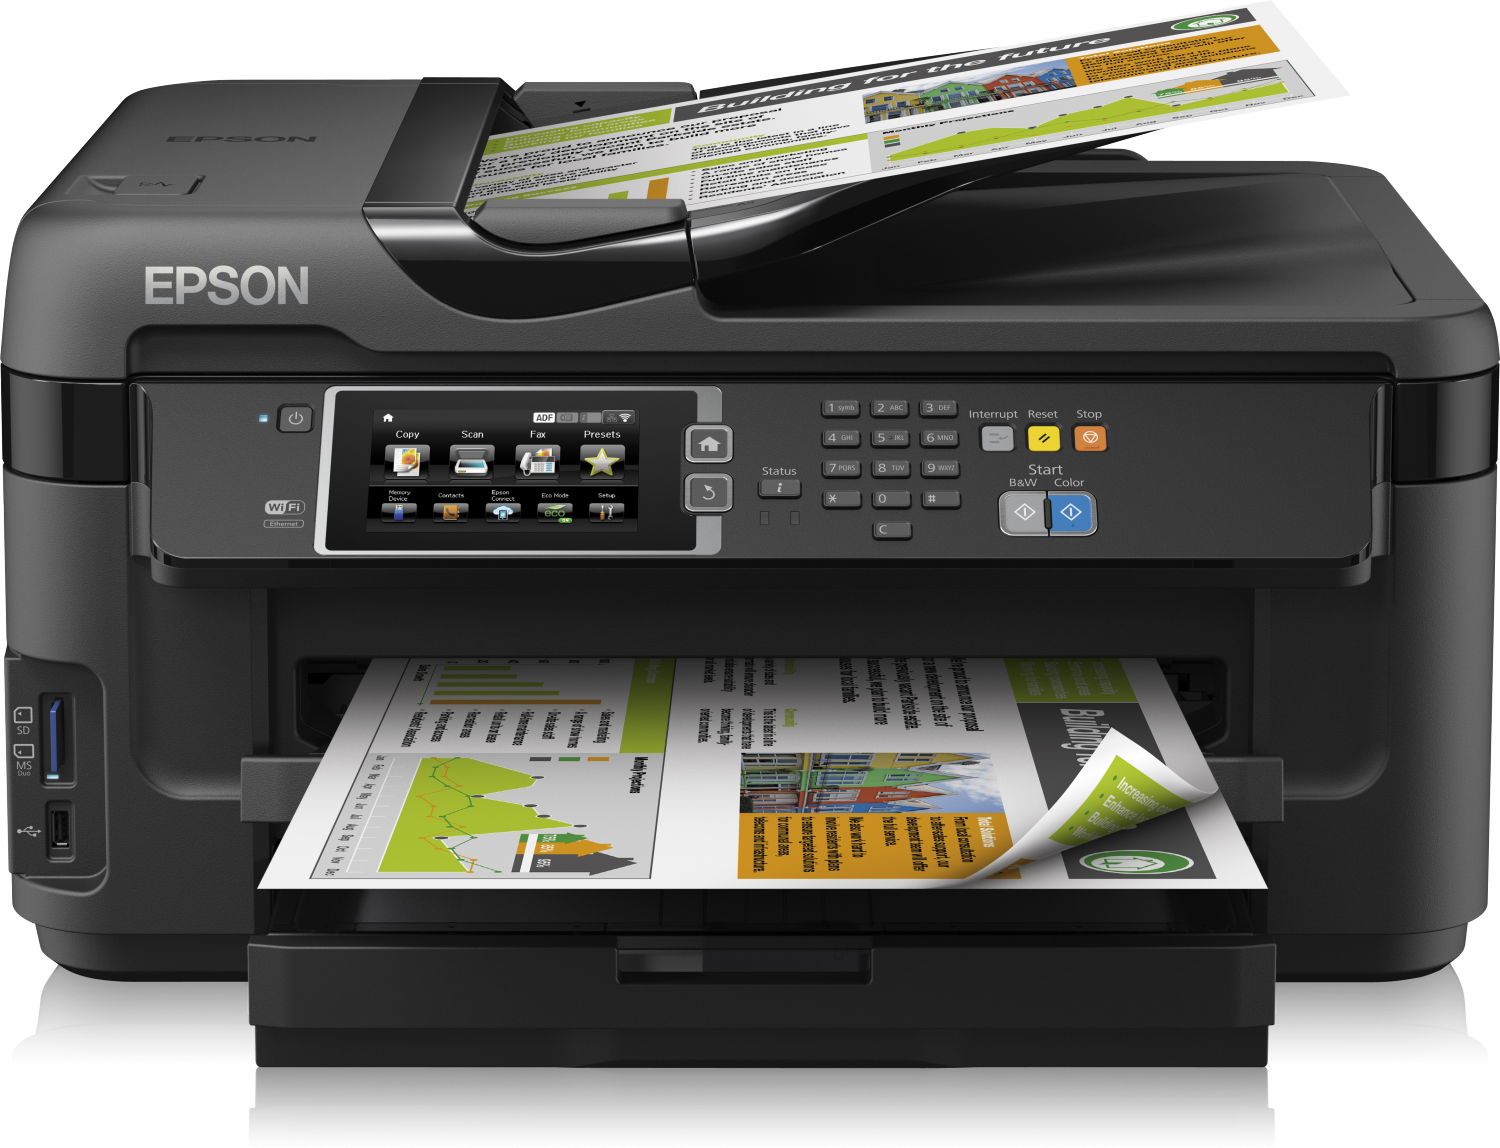 Epson WF-7620 Driver Ubuntu 16.04 How-to Download & Install - Featured